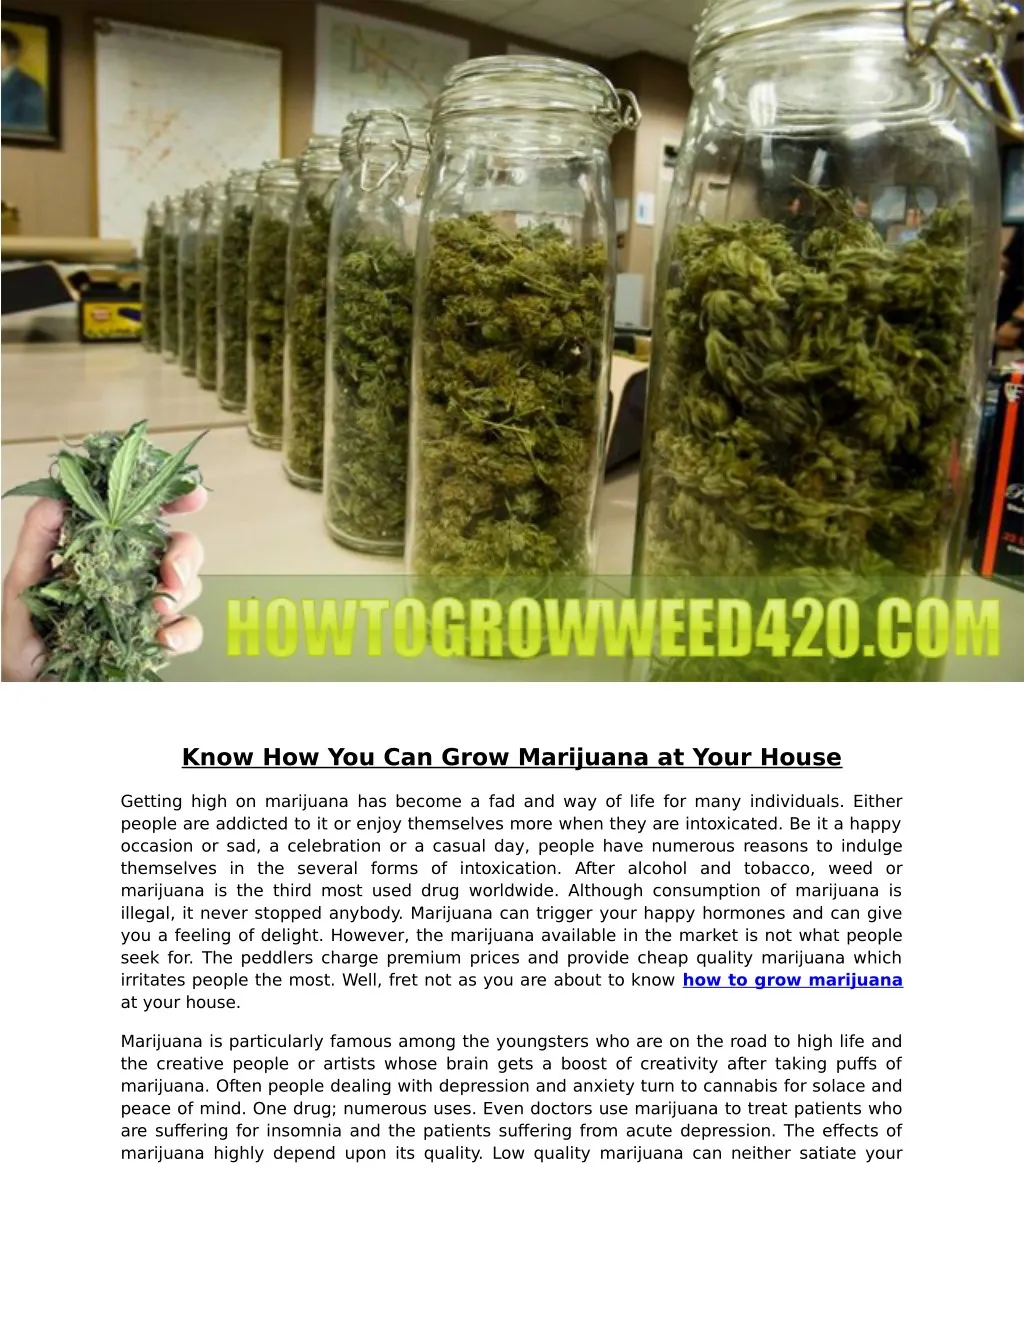 know how you can grow marijuana at your house